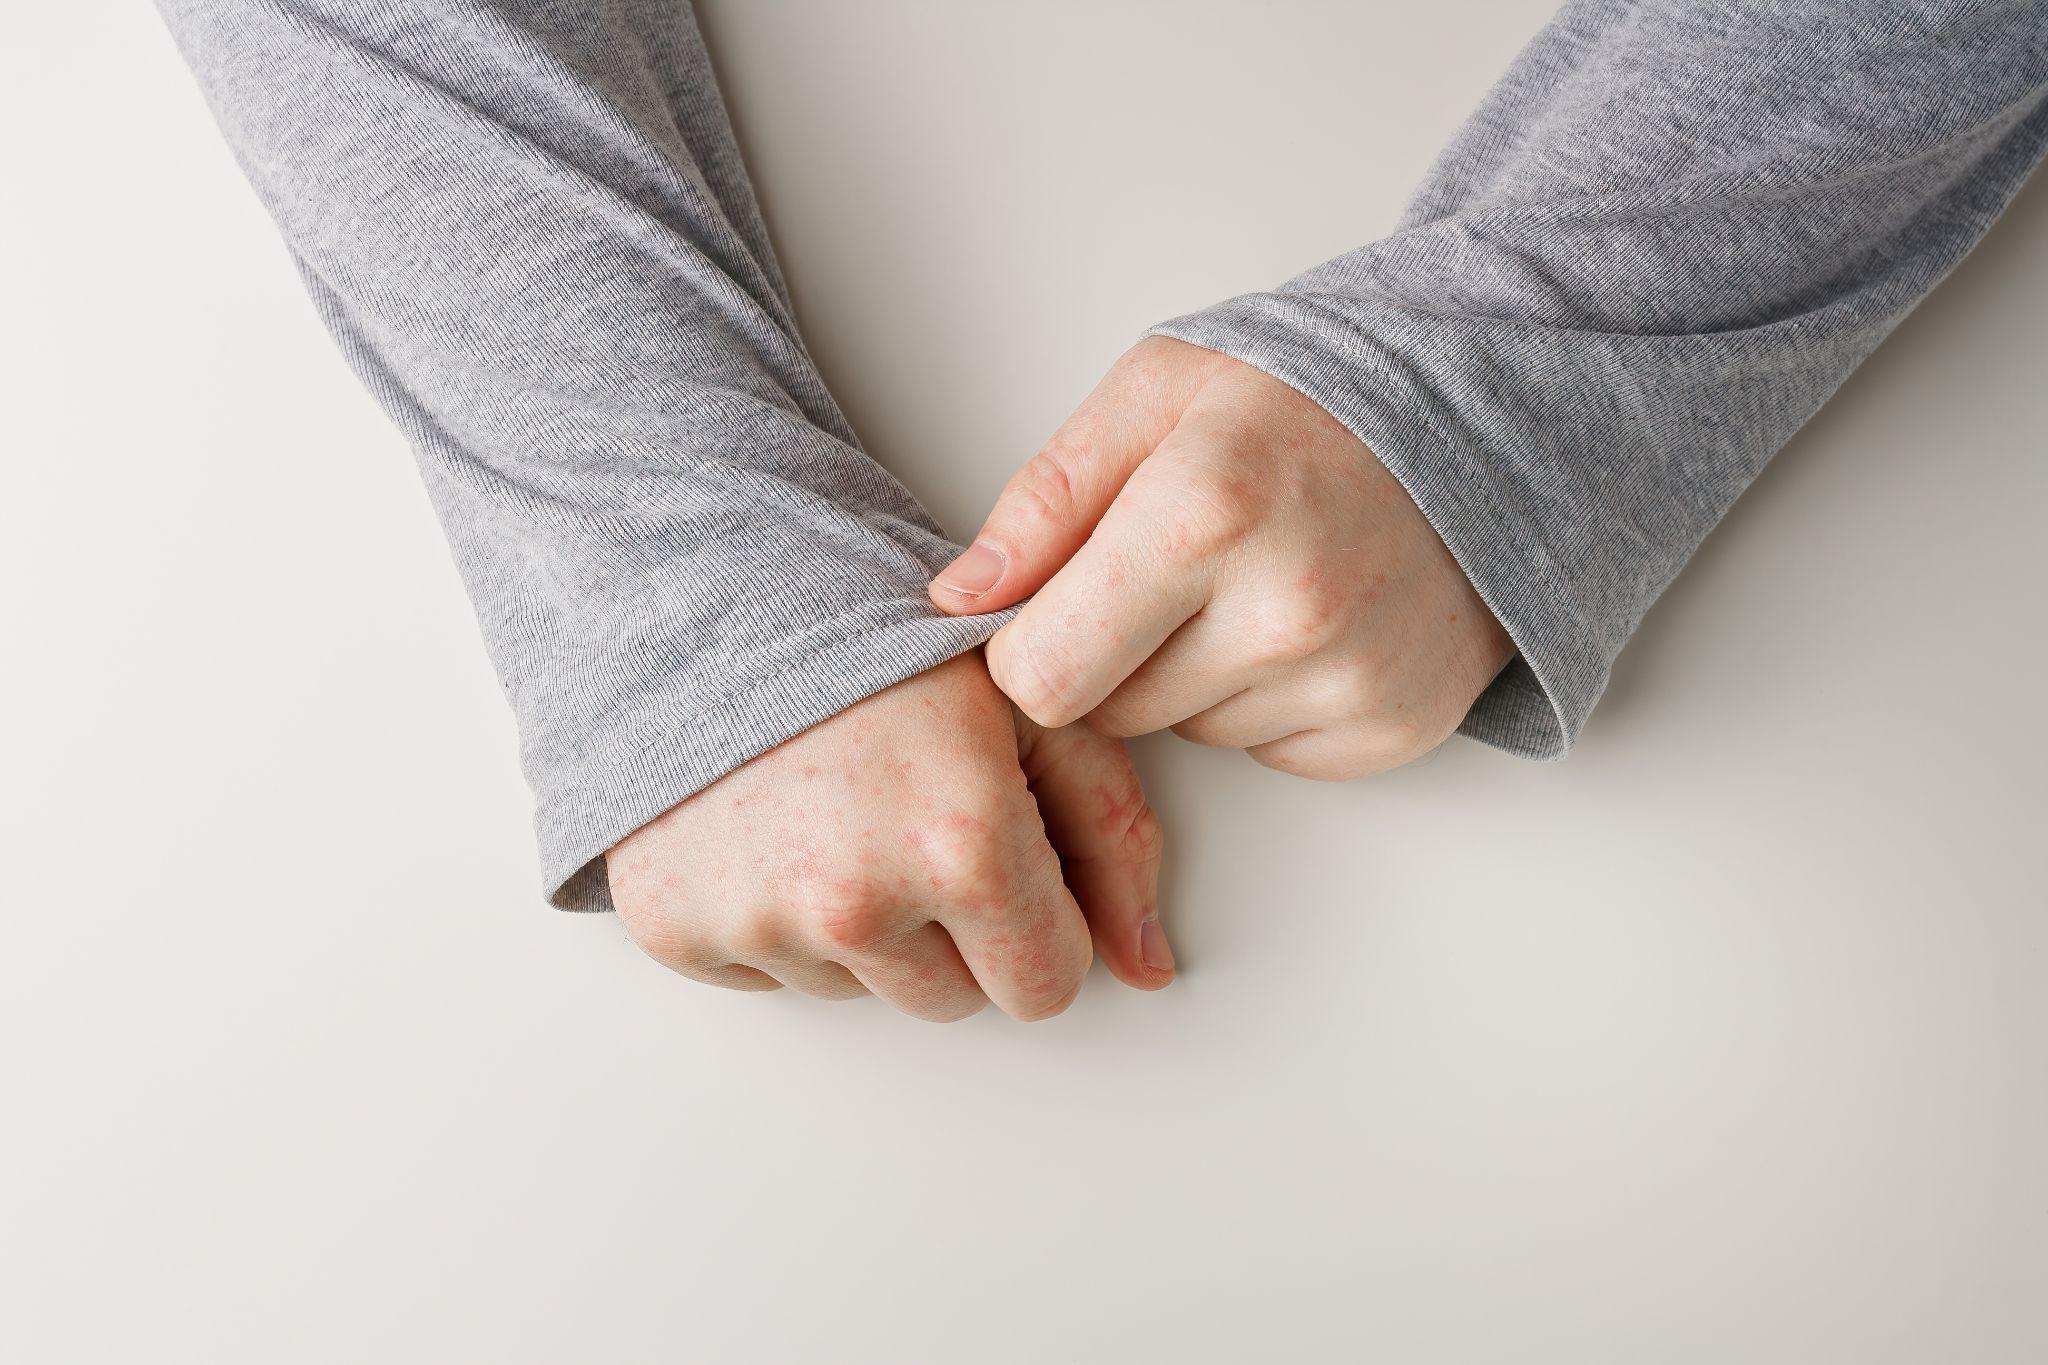 Person hiding hands with red spots on skin with grey sleeves.